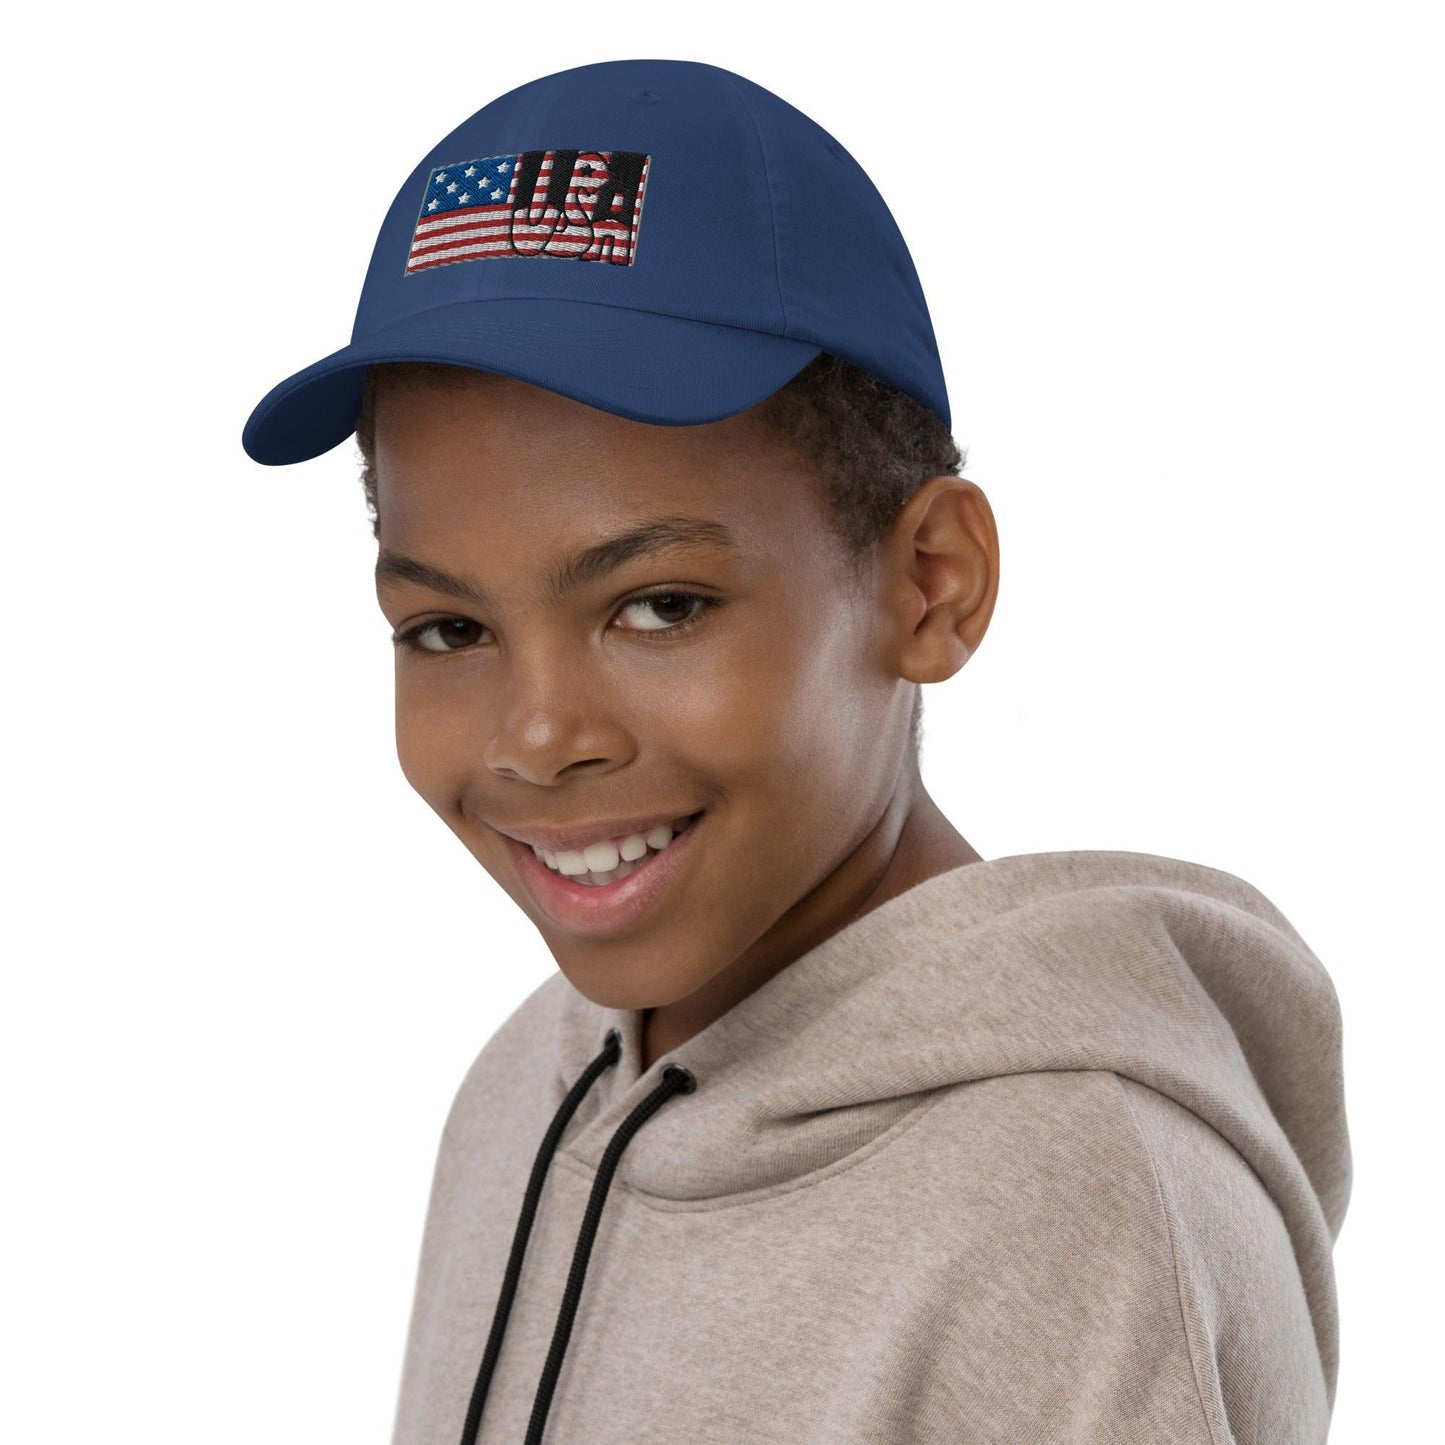 USA Flag Youth Baseball Cap: Embrace Patriotic Style with this Stylish and Versatile Headwear for Kids! - Lizard Vigilante